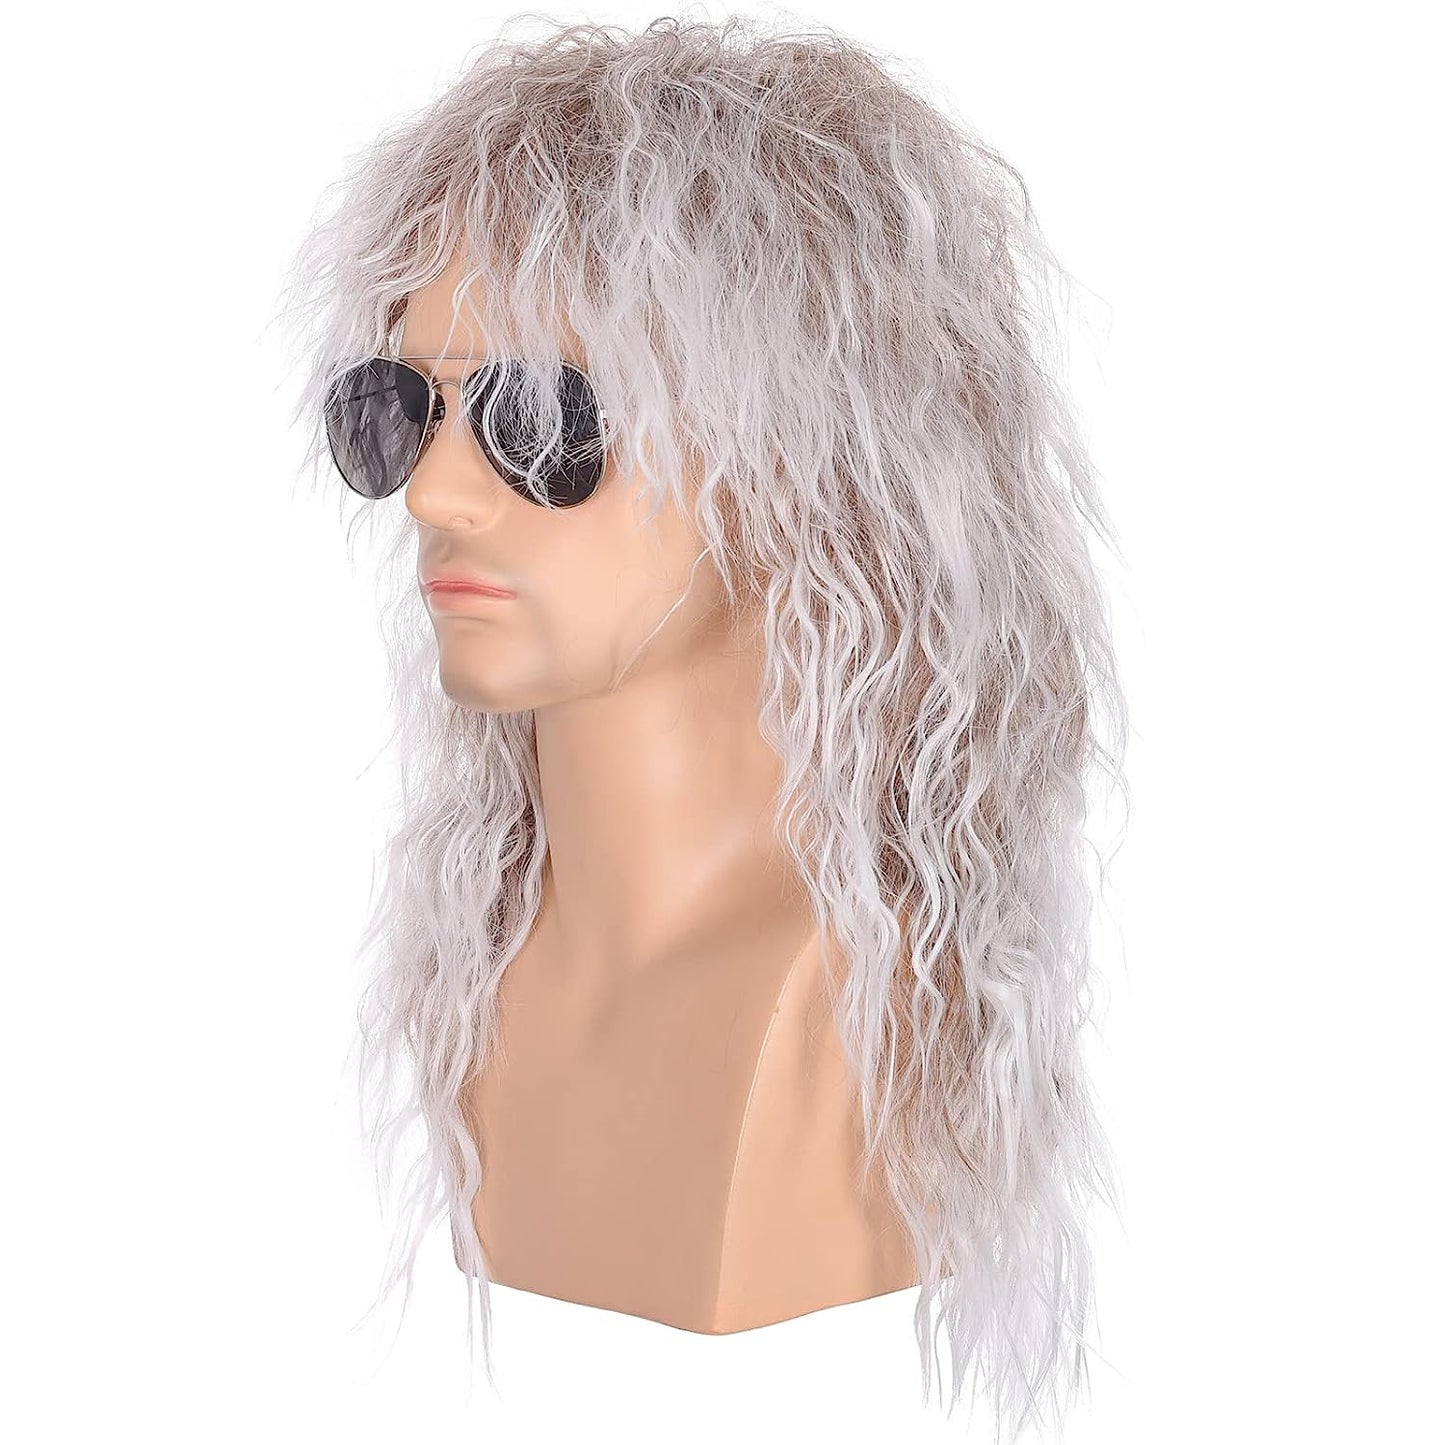 Heavy Metal ROCKER WIG 1980s Hair For Men Long Curly Silver Synthetic Glam Rocker Throwback Retro Look Perfect for Halloween, Cosplay, Costume - Asylum Books